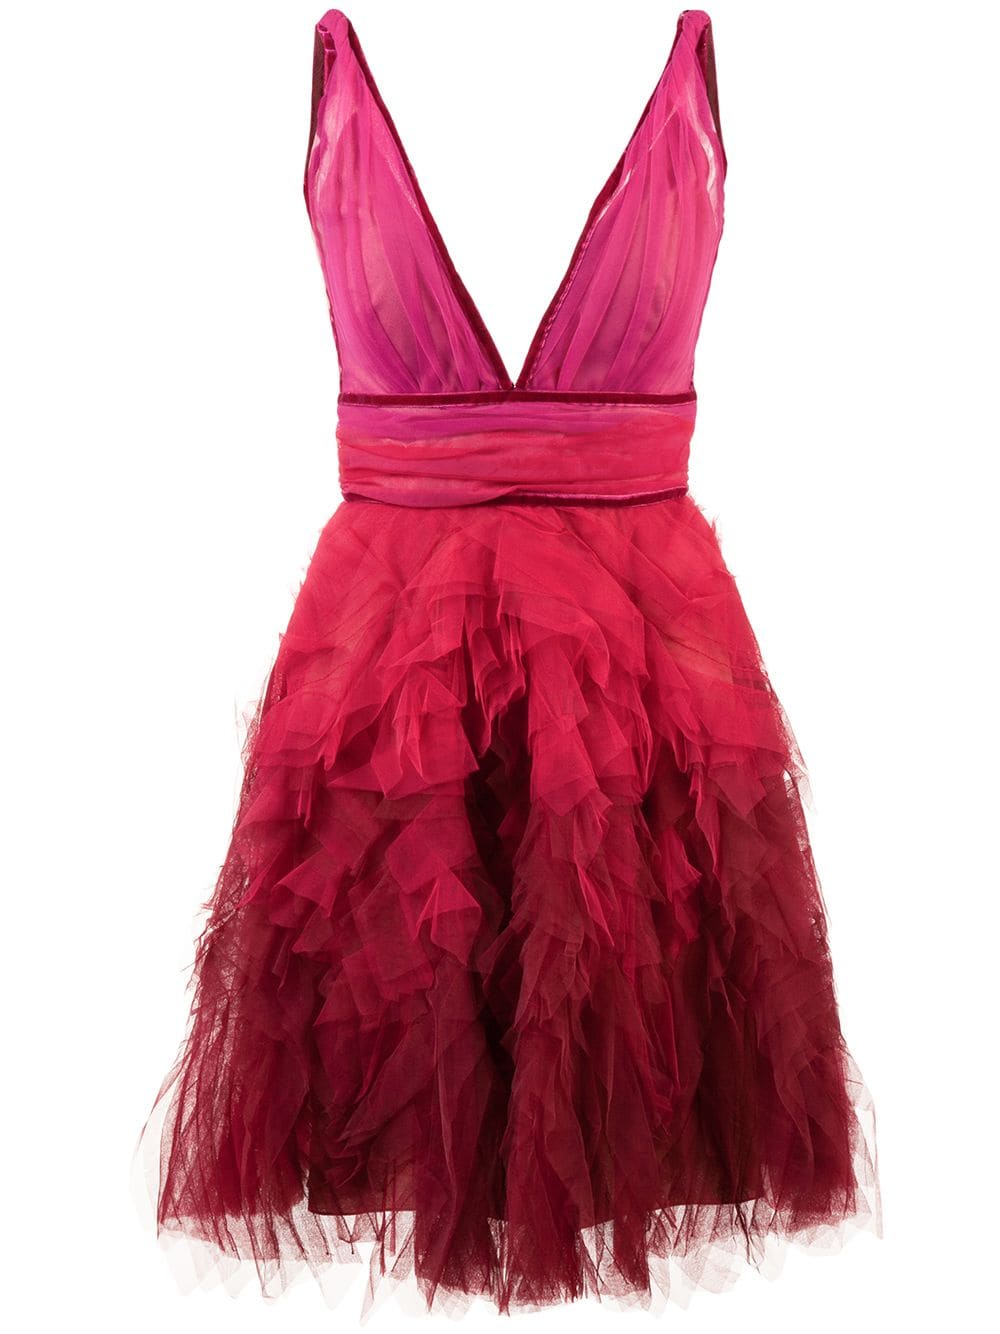 5 Trendy New Years Eve Outfits for women and men, tulle dress, MARCHESA NOTTE ruffle tulle pink dress